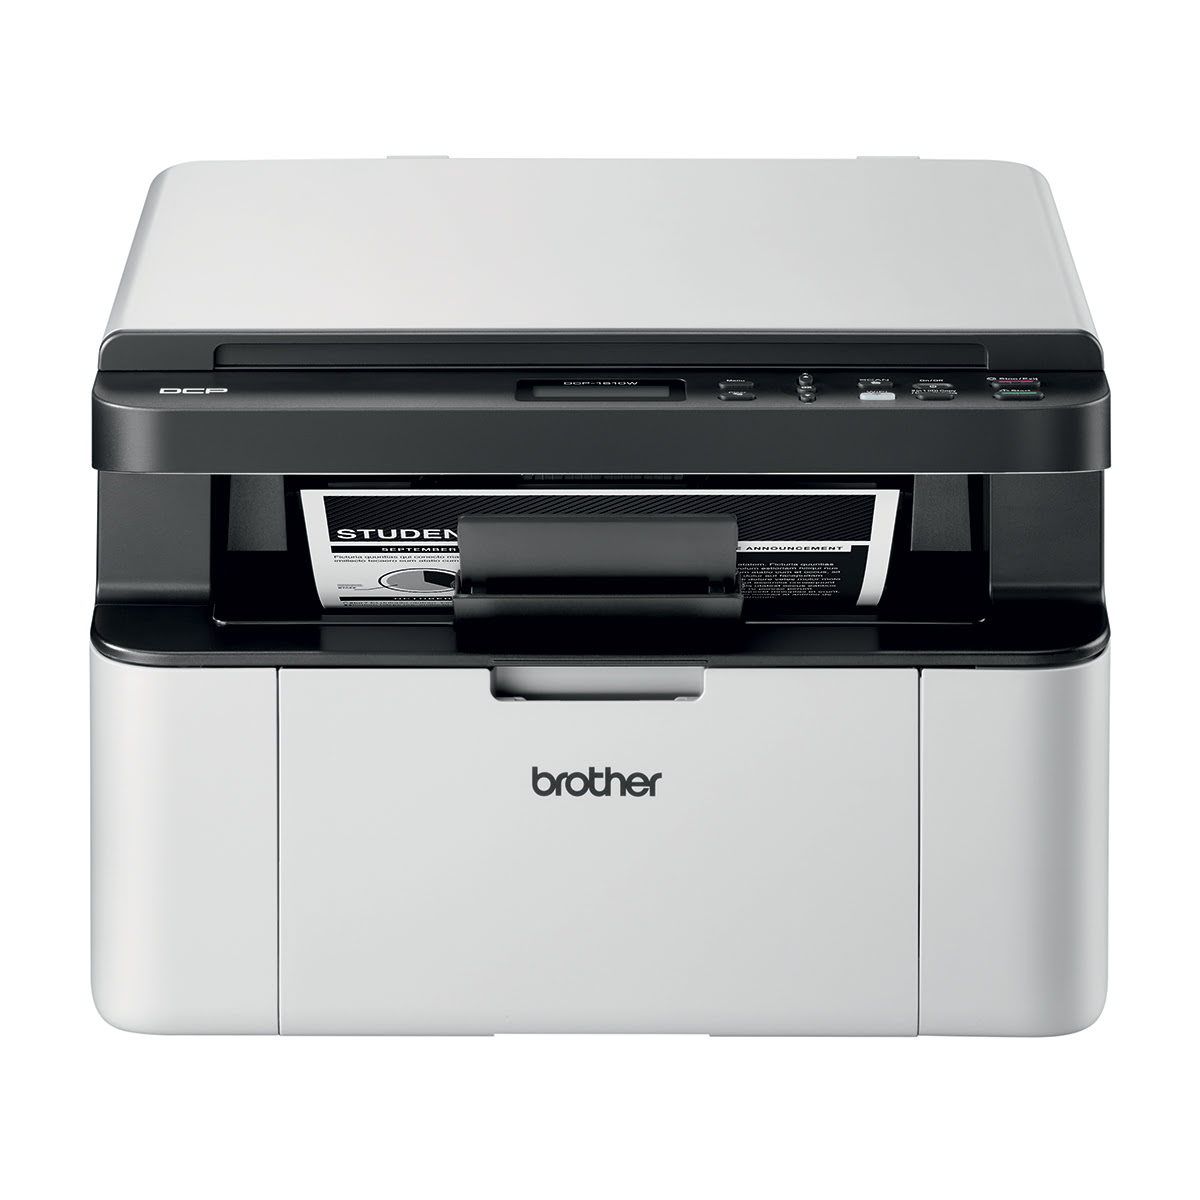 Imprimante multifonction Brother DCP-1610W